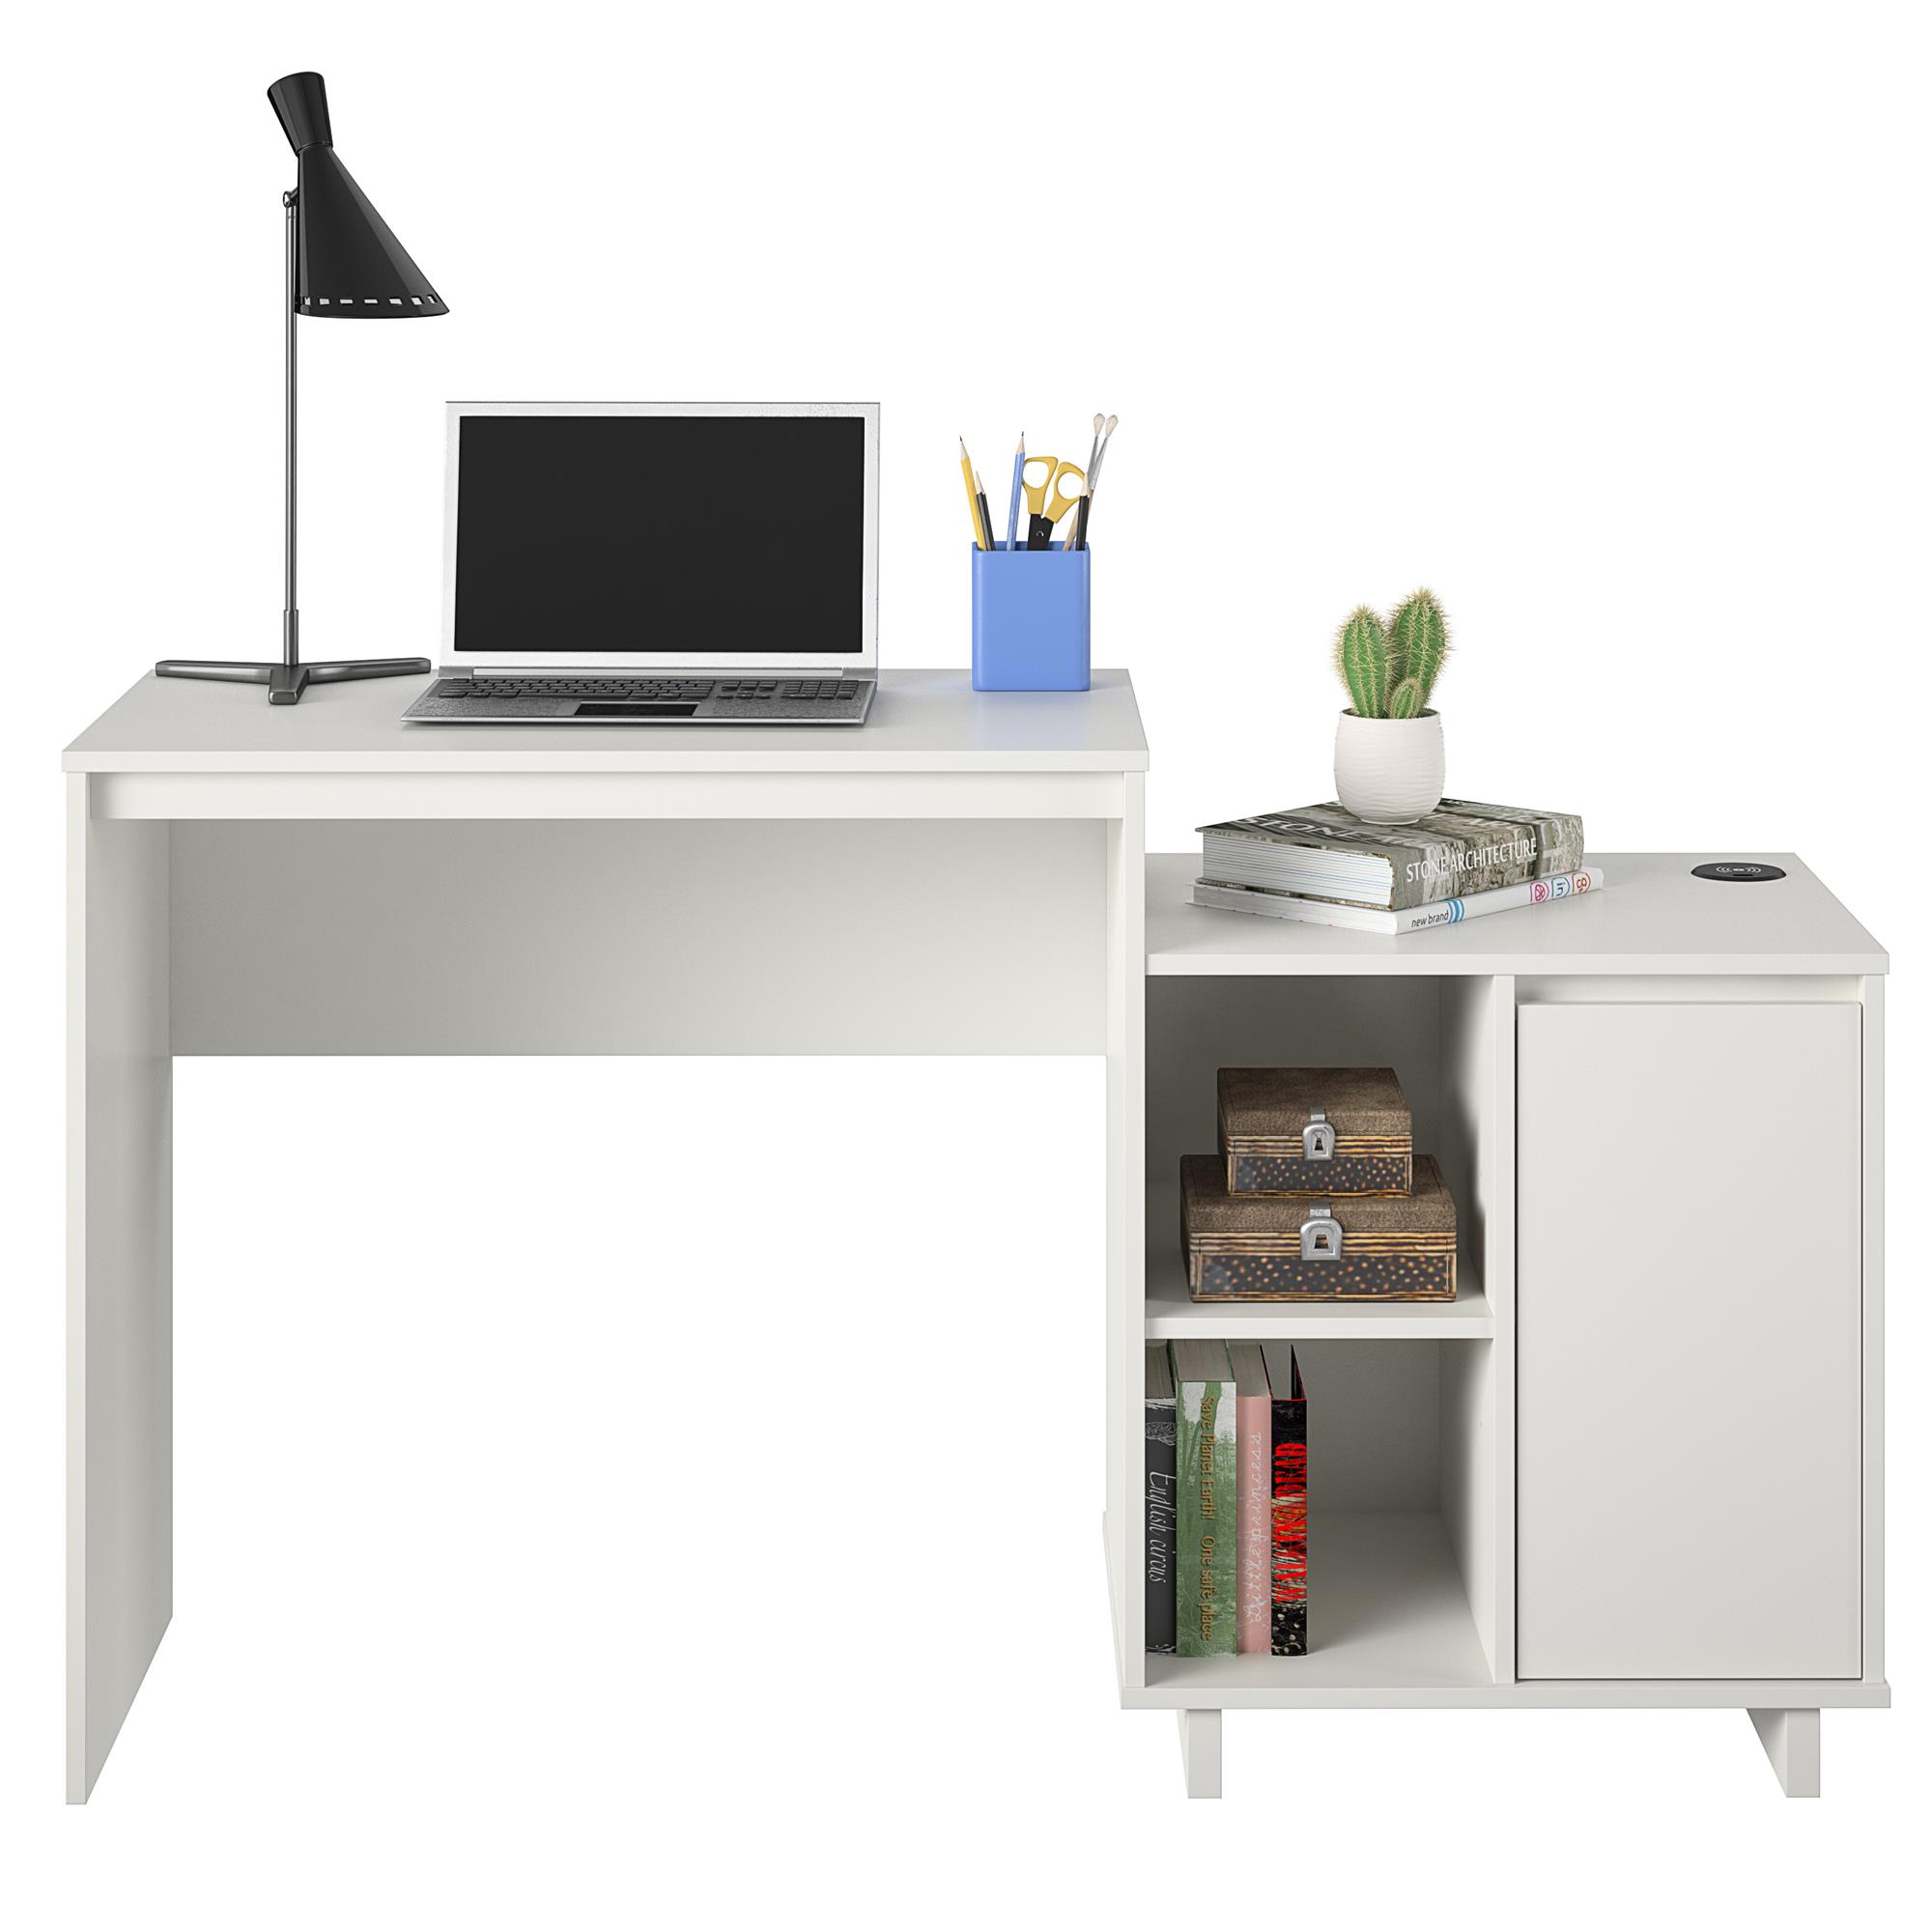 Ameriwood Home Renwick Computer Desk / Cabinet Combo with Wireless Charging Port, White - image 4 of 13